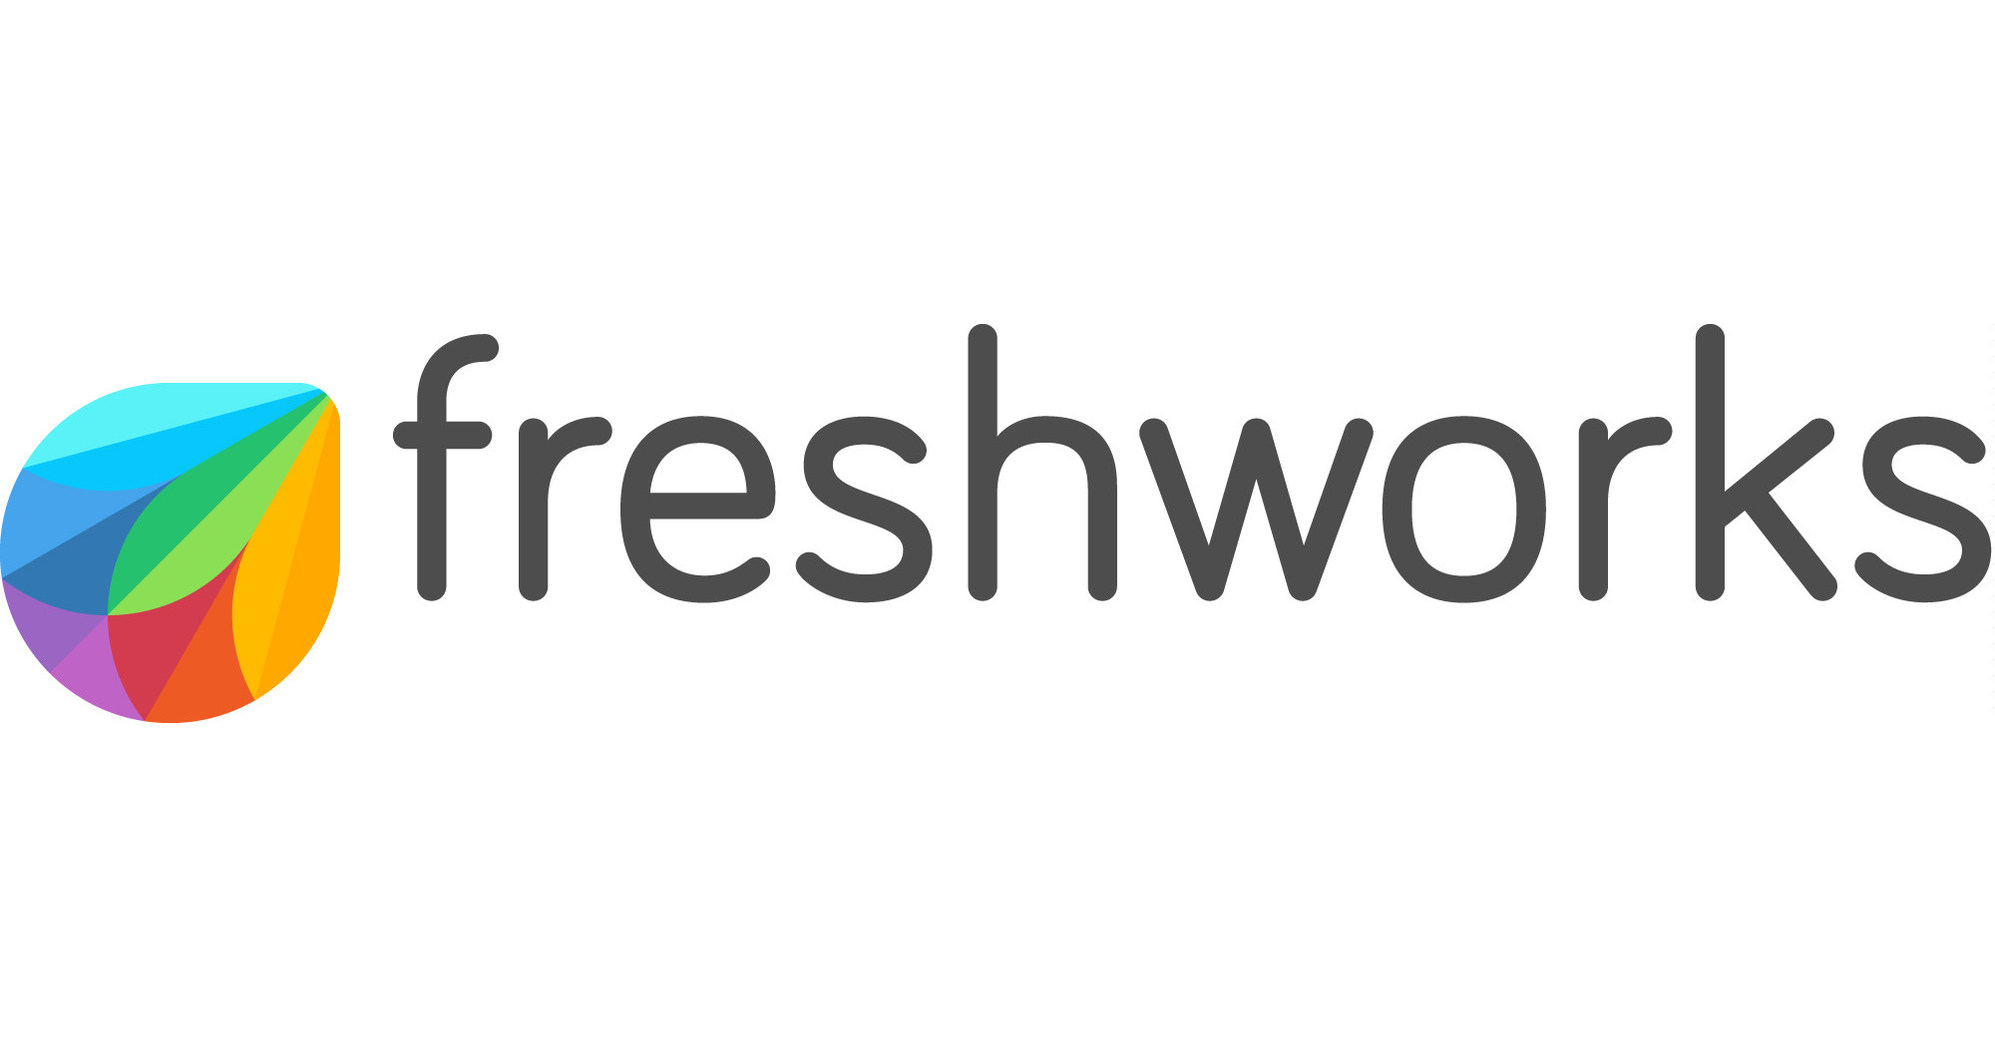 freshworks files registration statement for proposed initial public offering